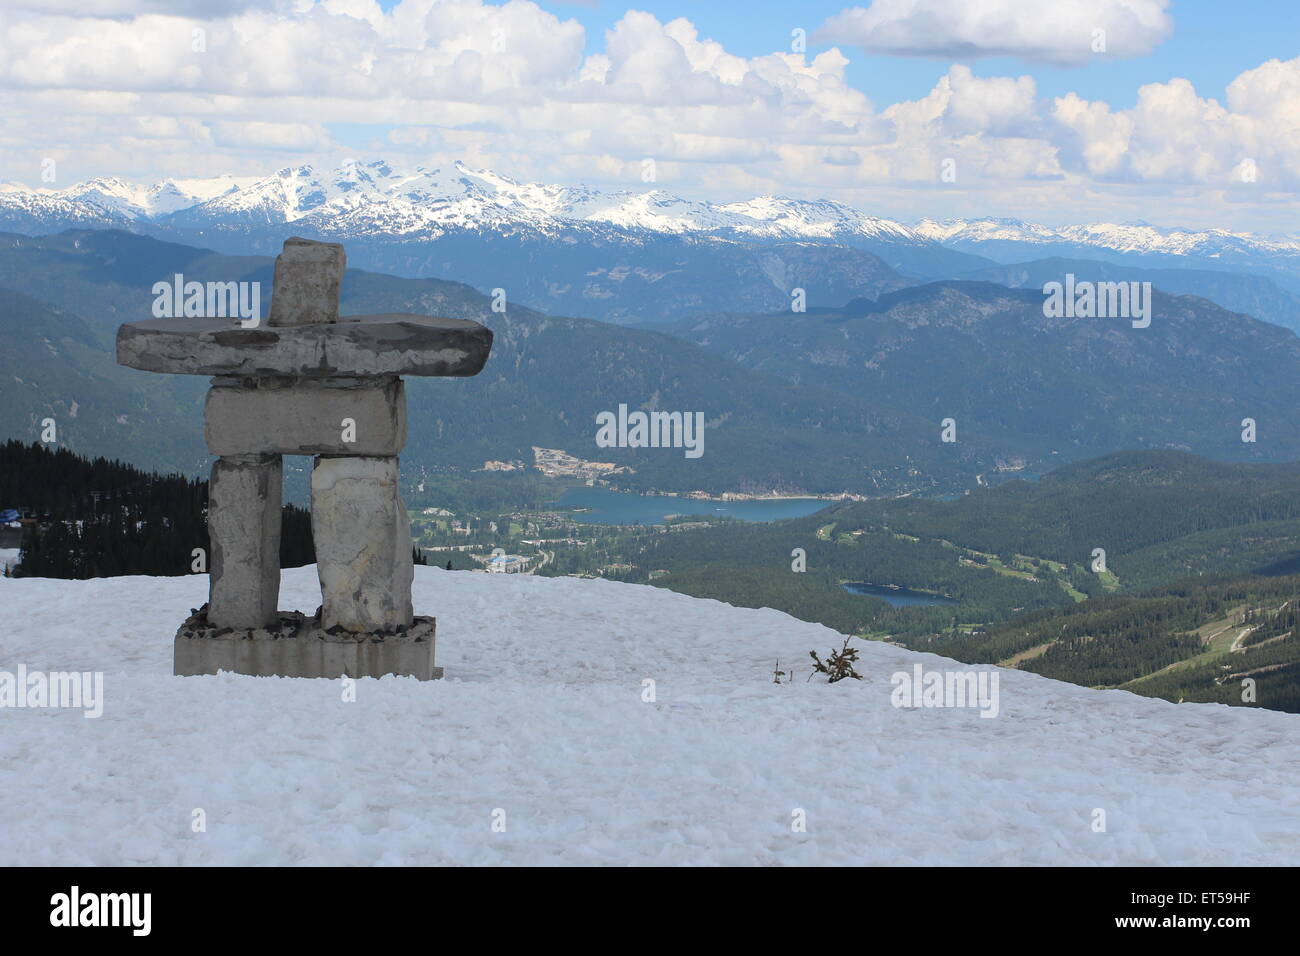 An inuksuk is a man-made stone landmark or cairn used by the Inuit, Inupiat, Kalaallit, Yupik, aboriginal peoples of the Arctic Stock Photo